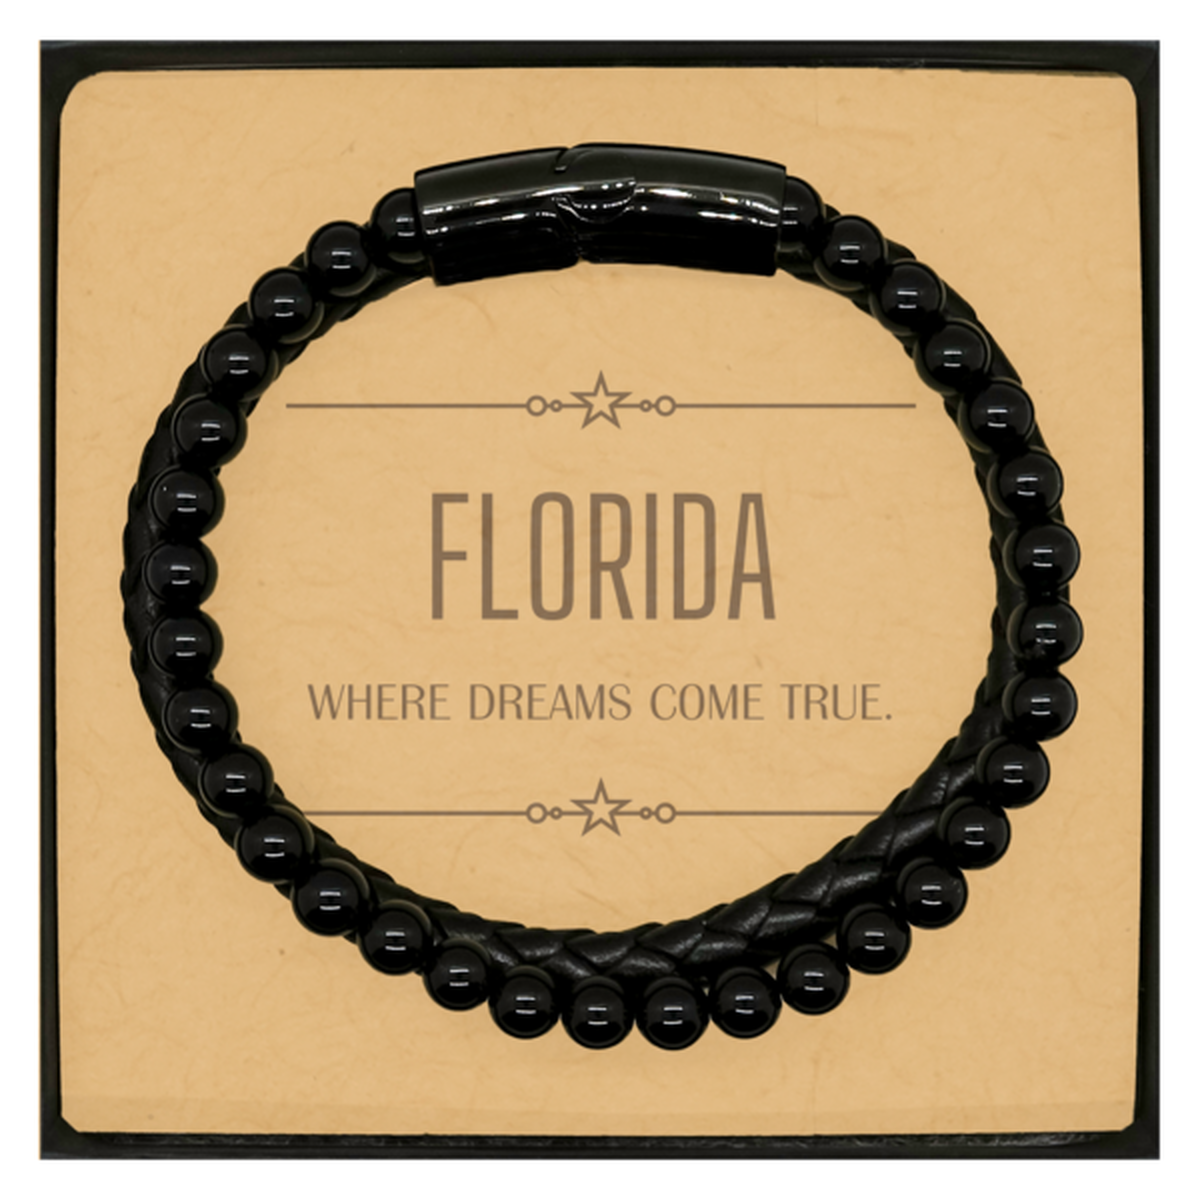 Love Florida State Stone Leather Bracelets, Florida Where dreams come true, Birthday Christmas Inspirational Gifts For Florida Men, Women, Friends